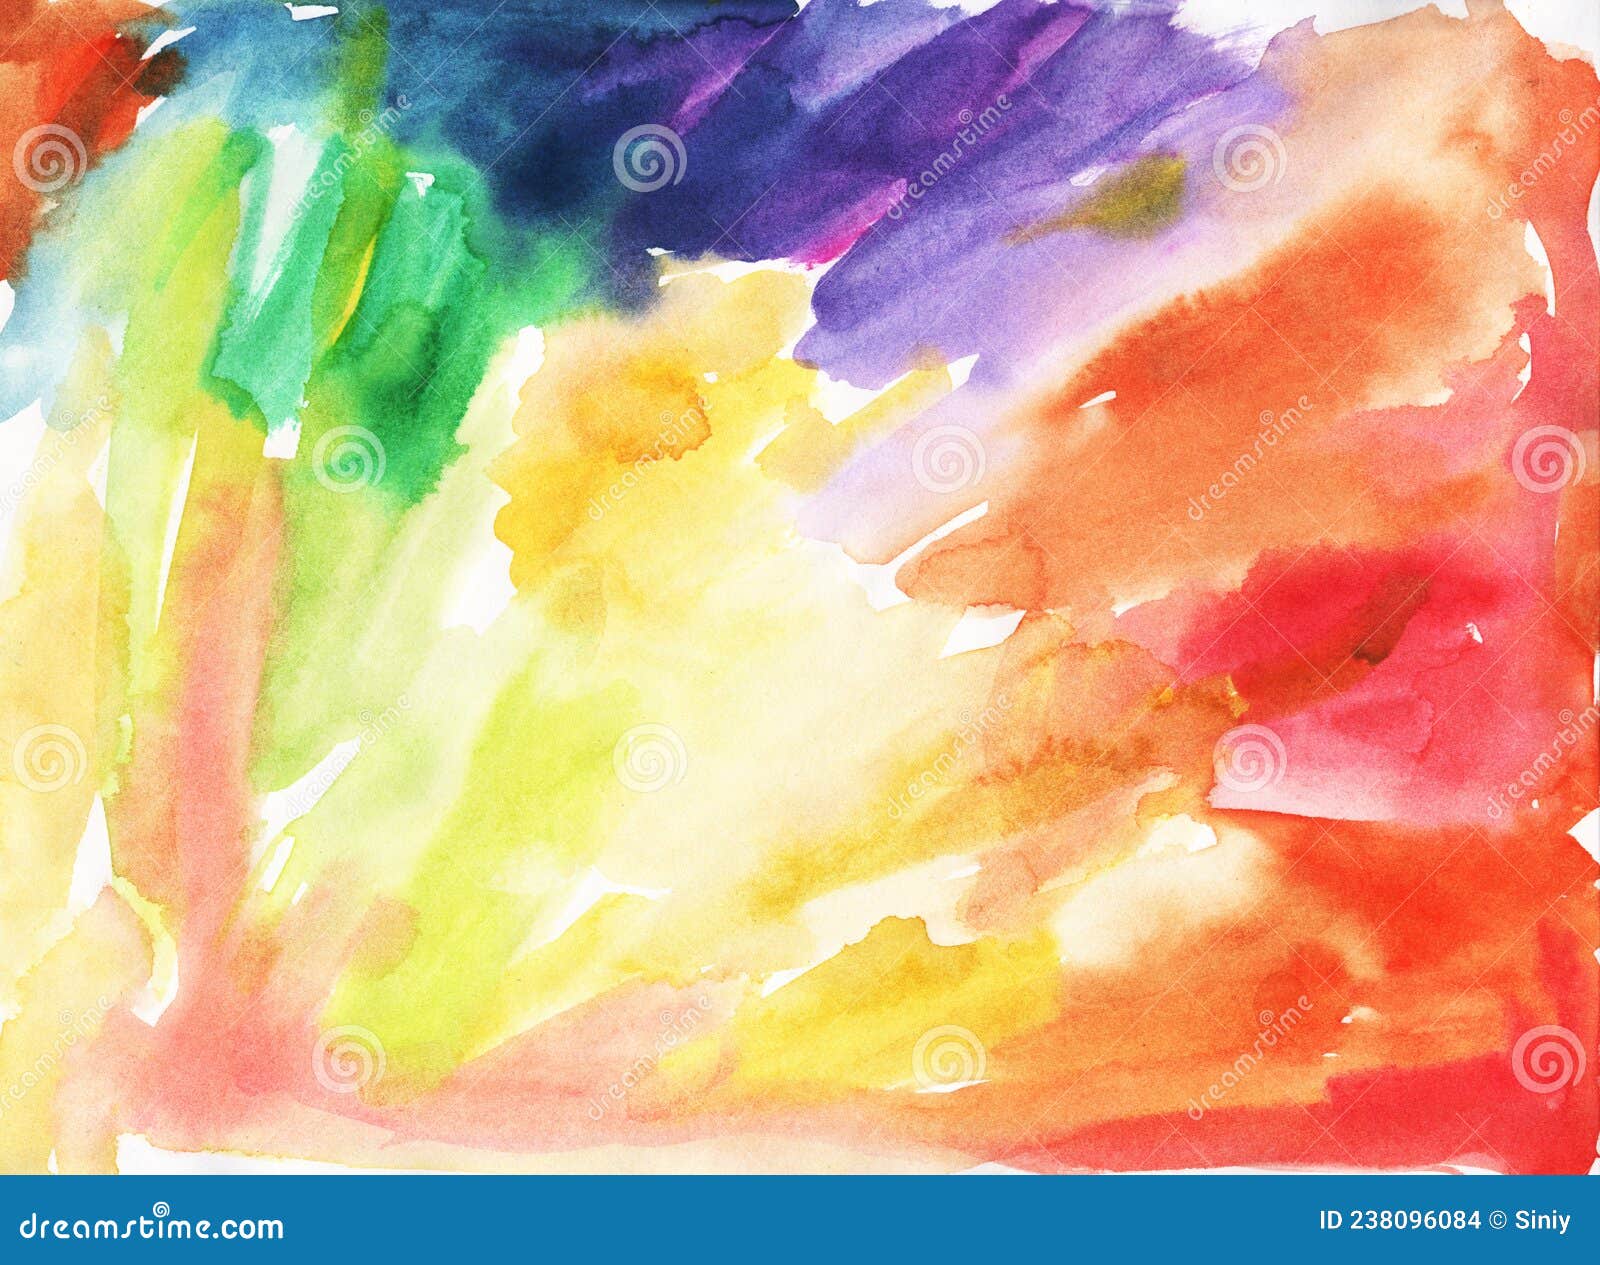 watercolor abstract crafty background, rainbow color scheme, artistic watercolor rainbow color palette